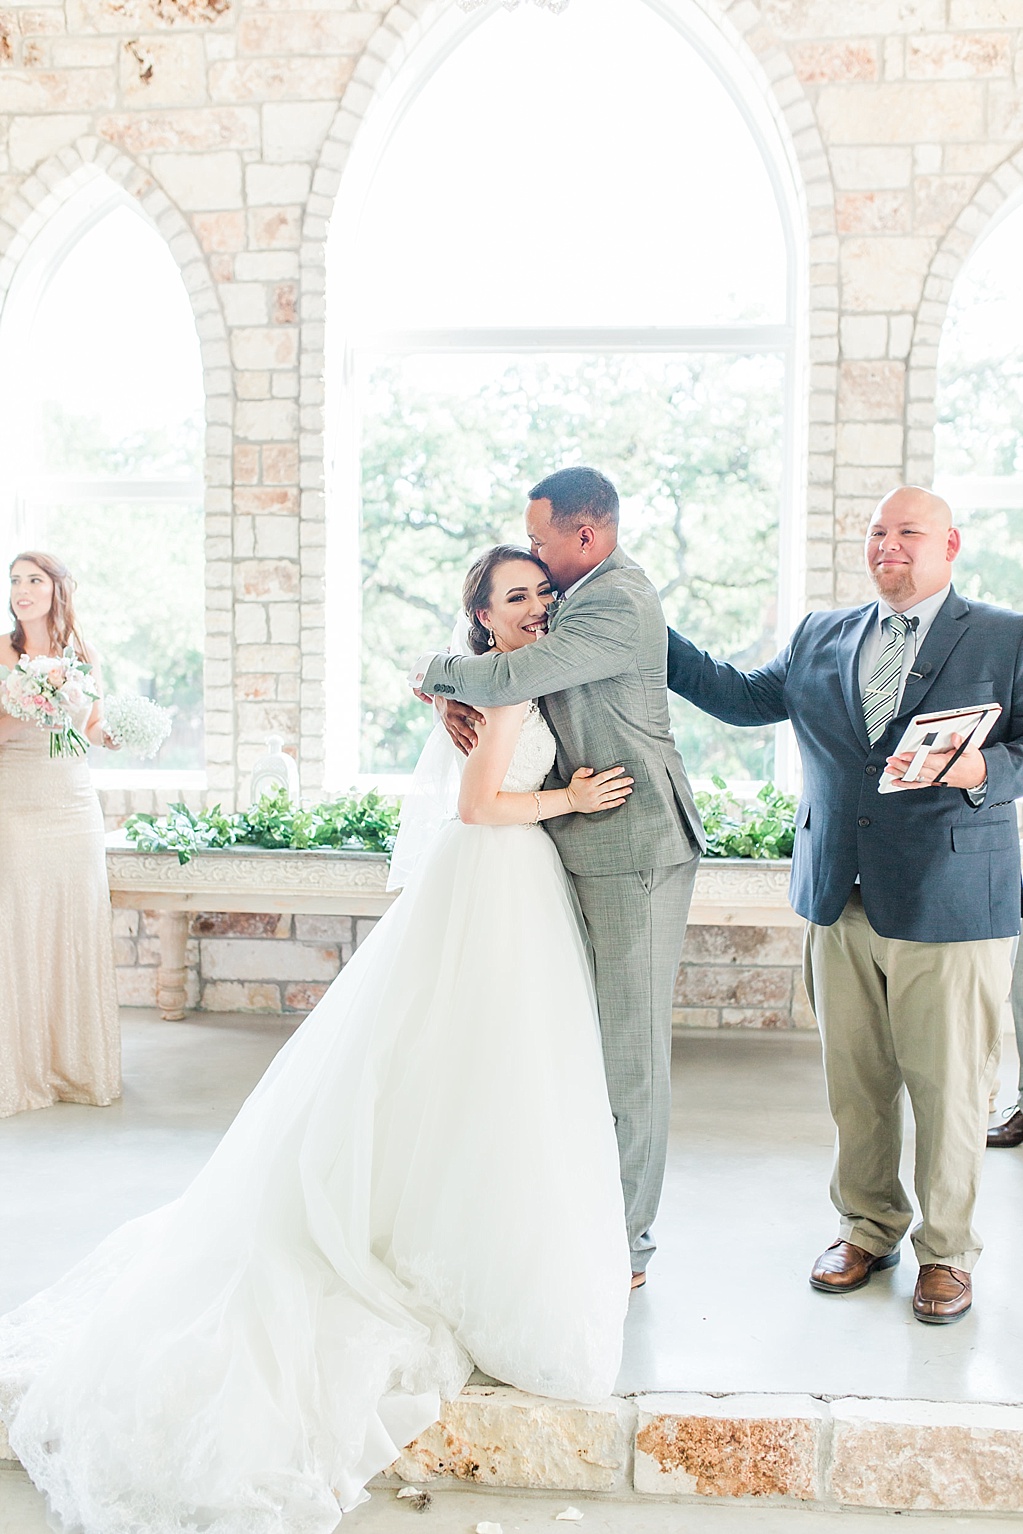 A Blush Vintage Summer Wedding at The Chandelier of Gruene in New Braunfels Texas by Allison Jeffers Photography 0060